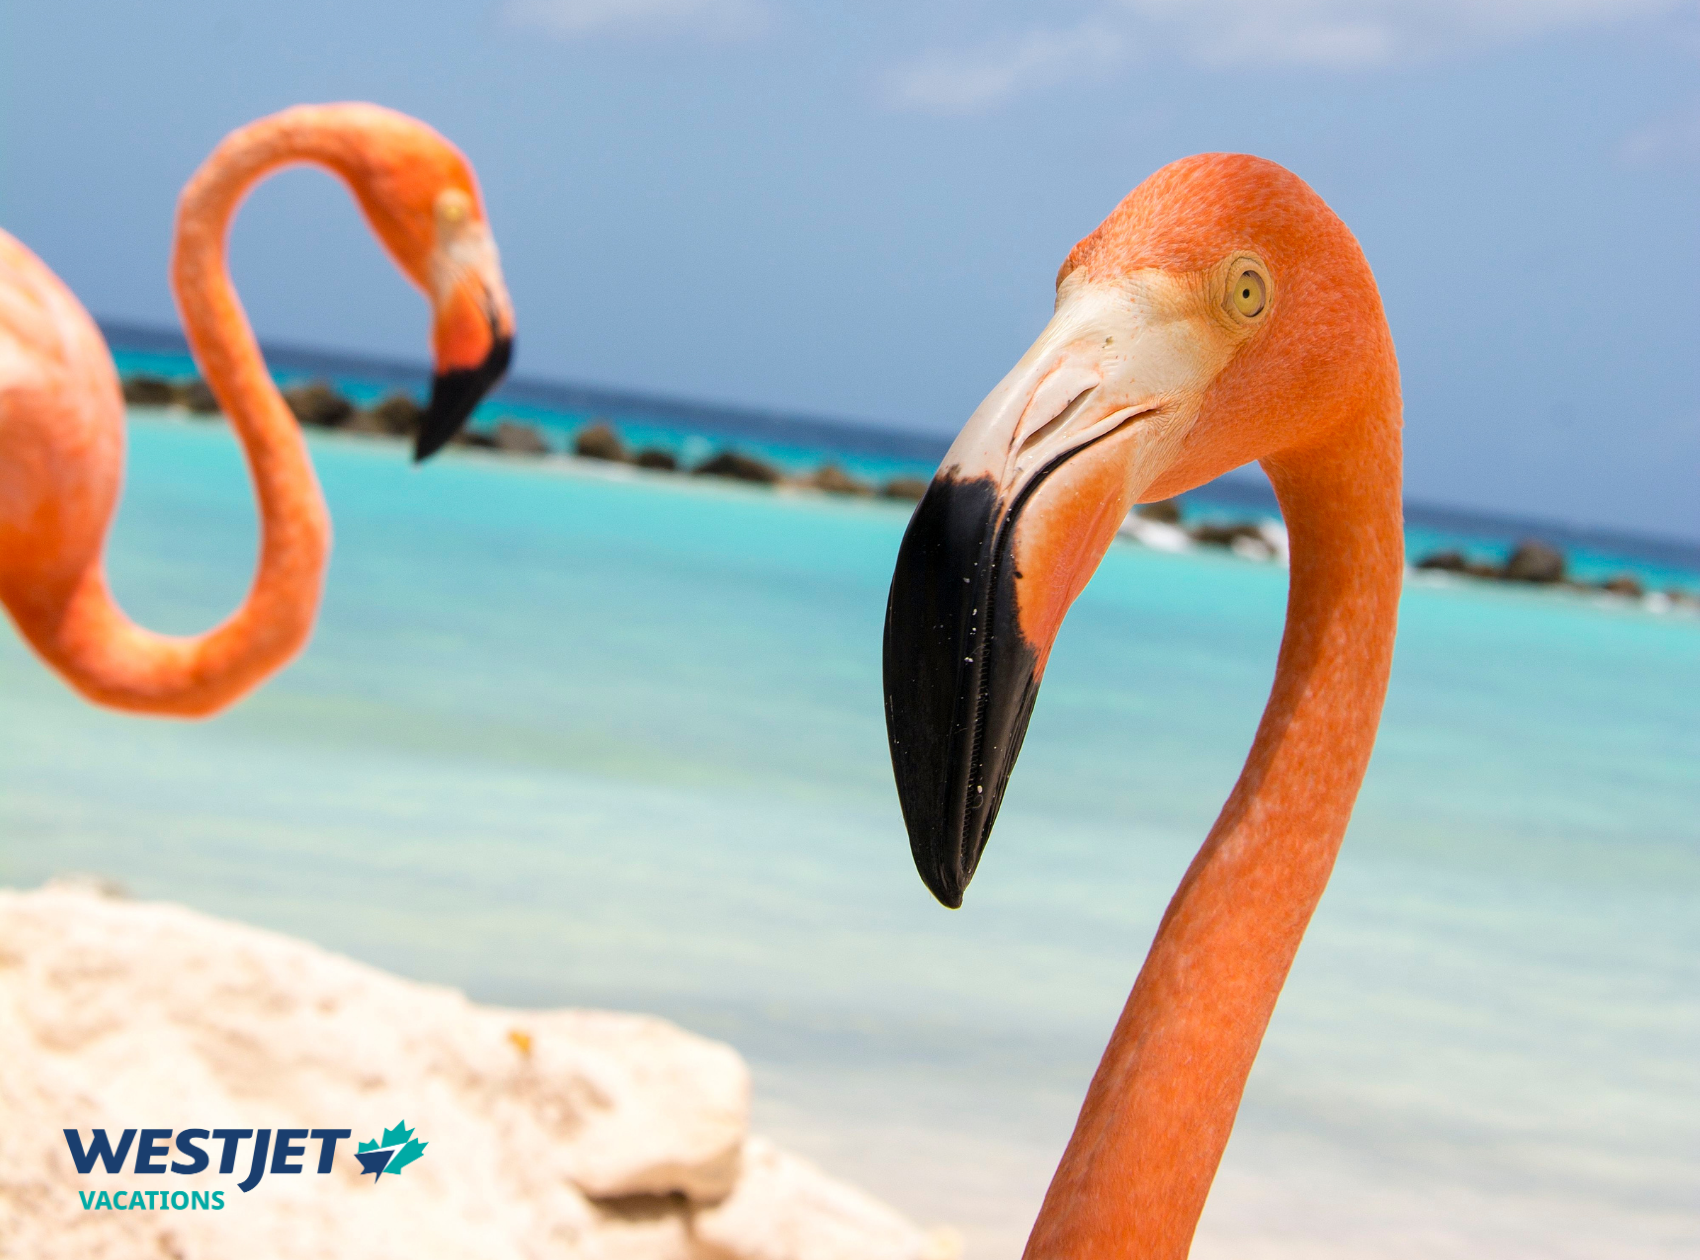 Discover Paradise with WestJet Vacations in Aruba!